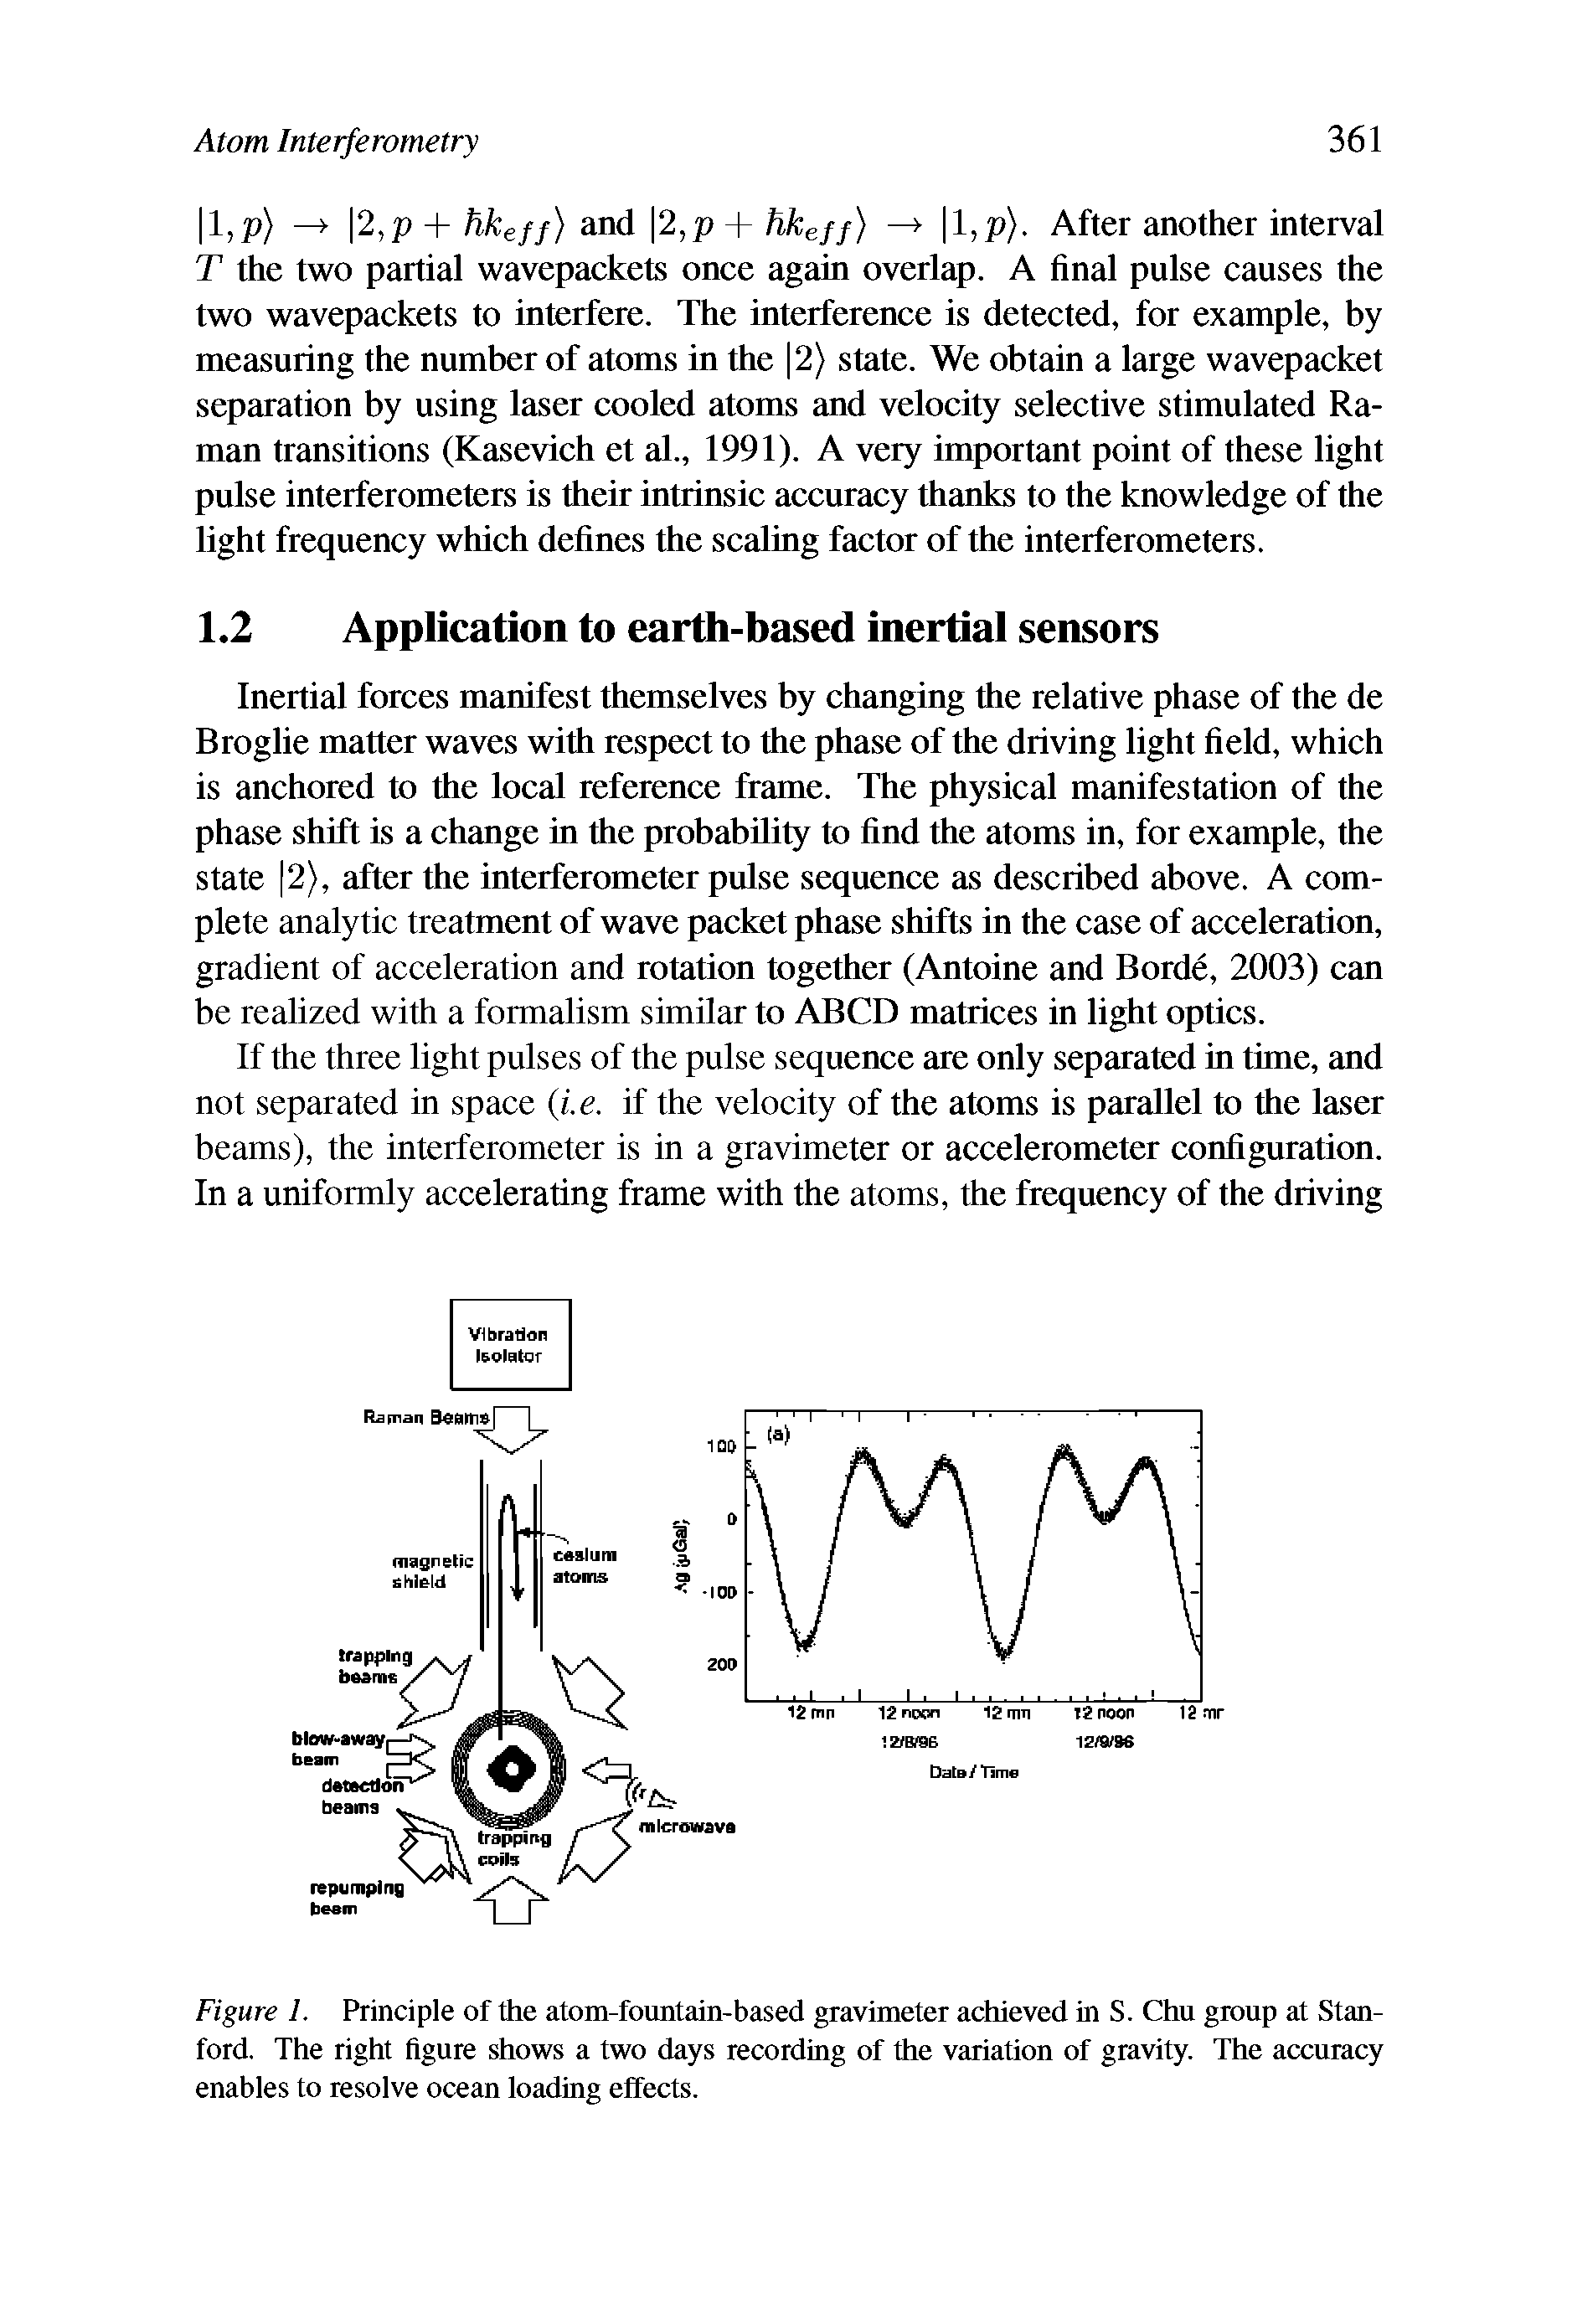 Figure 1. Principle of the atom-fountain-based gravimeter achieved in S. Chu group at Stanford. The right figure shows a two days recording of the variation of gravity. The accuracy enables to resolve ocean loading effects.